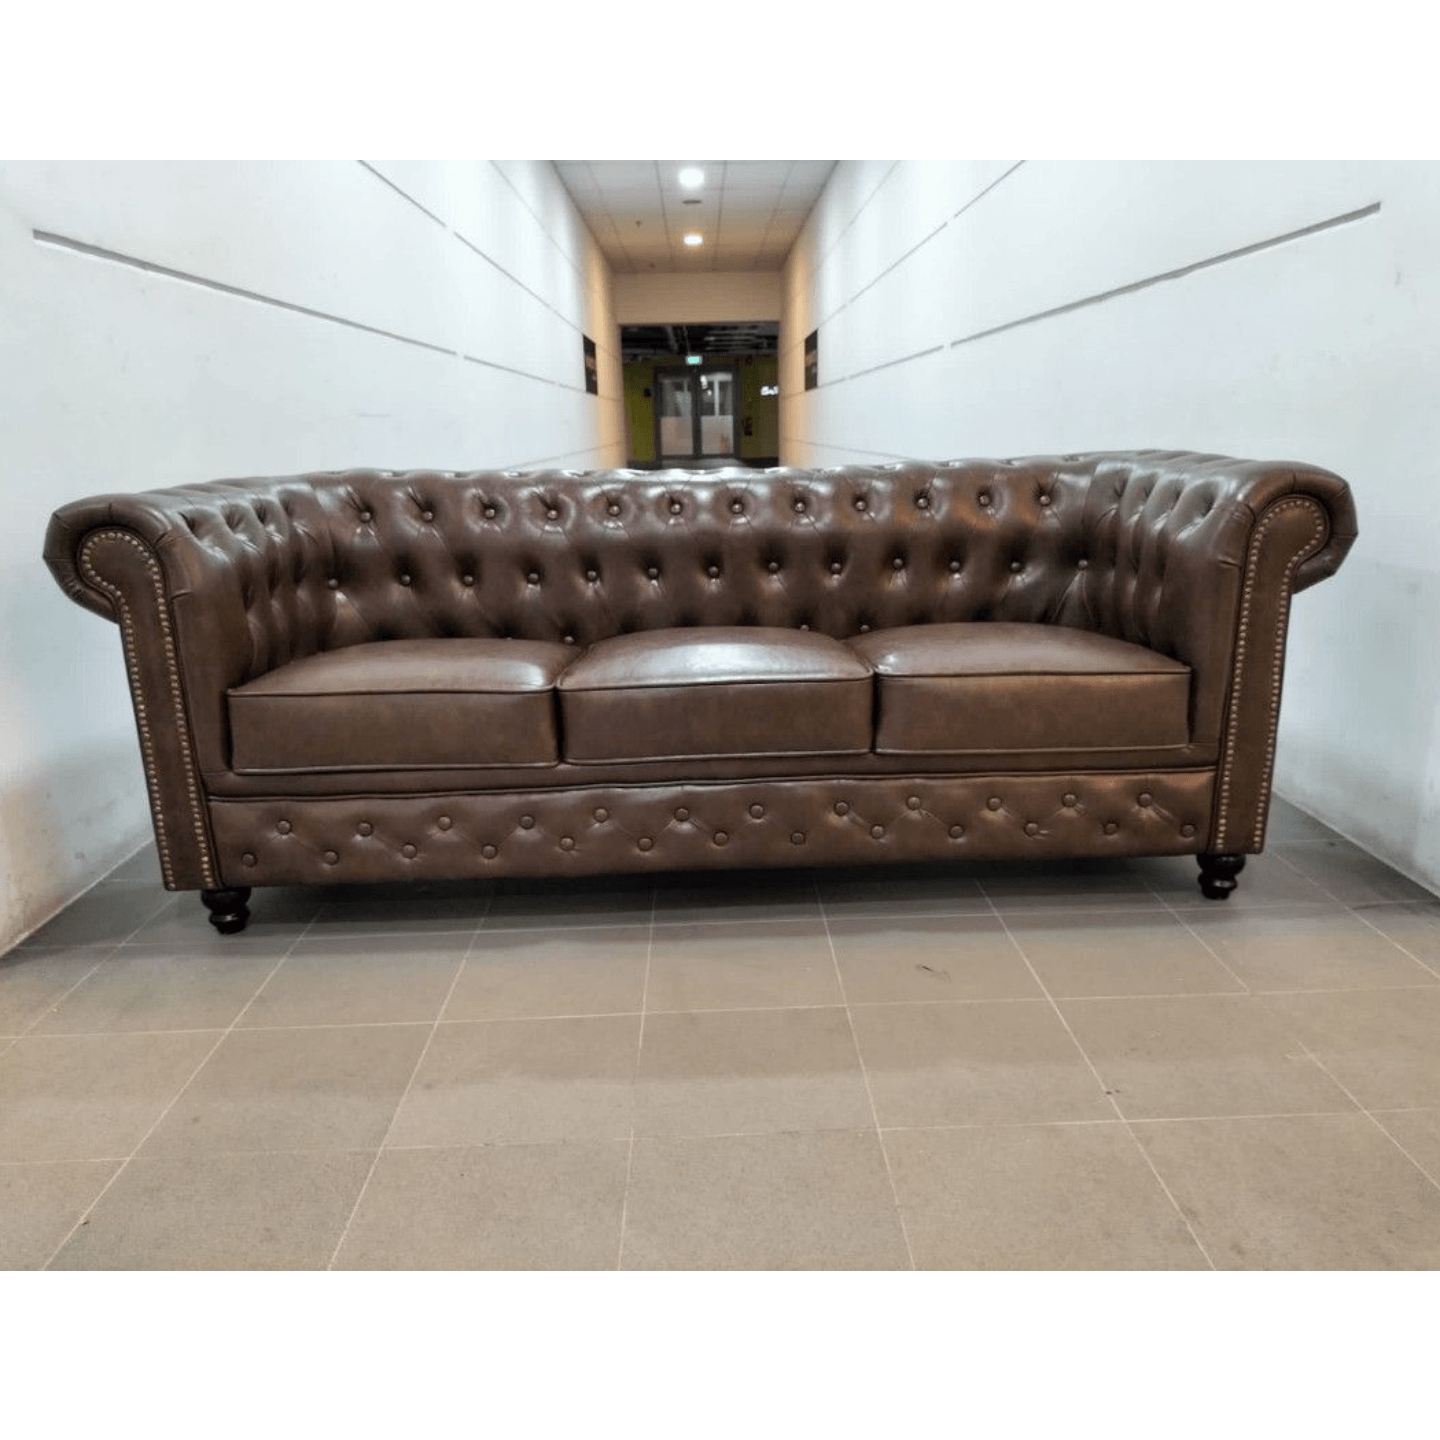 PRE ORDER - SALVADORE X 3 Seater Chesterfield Sofa in DARK COCO BROWN - Estimated Delivery by End of Apr 2023